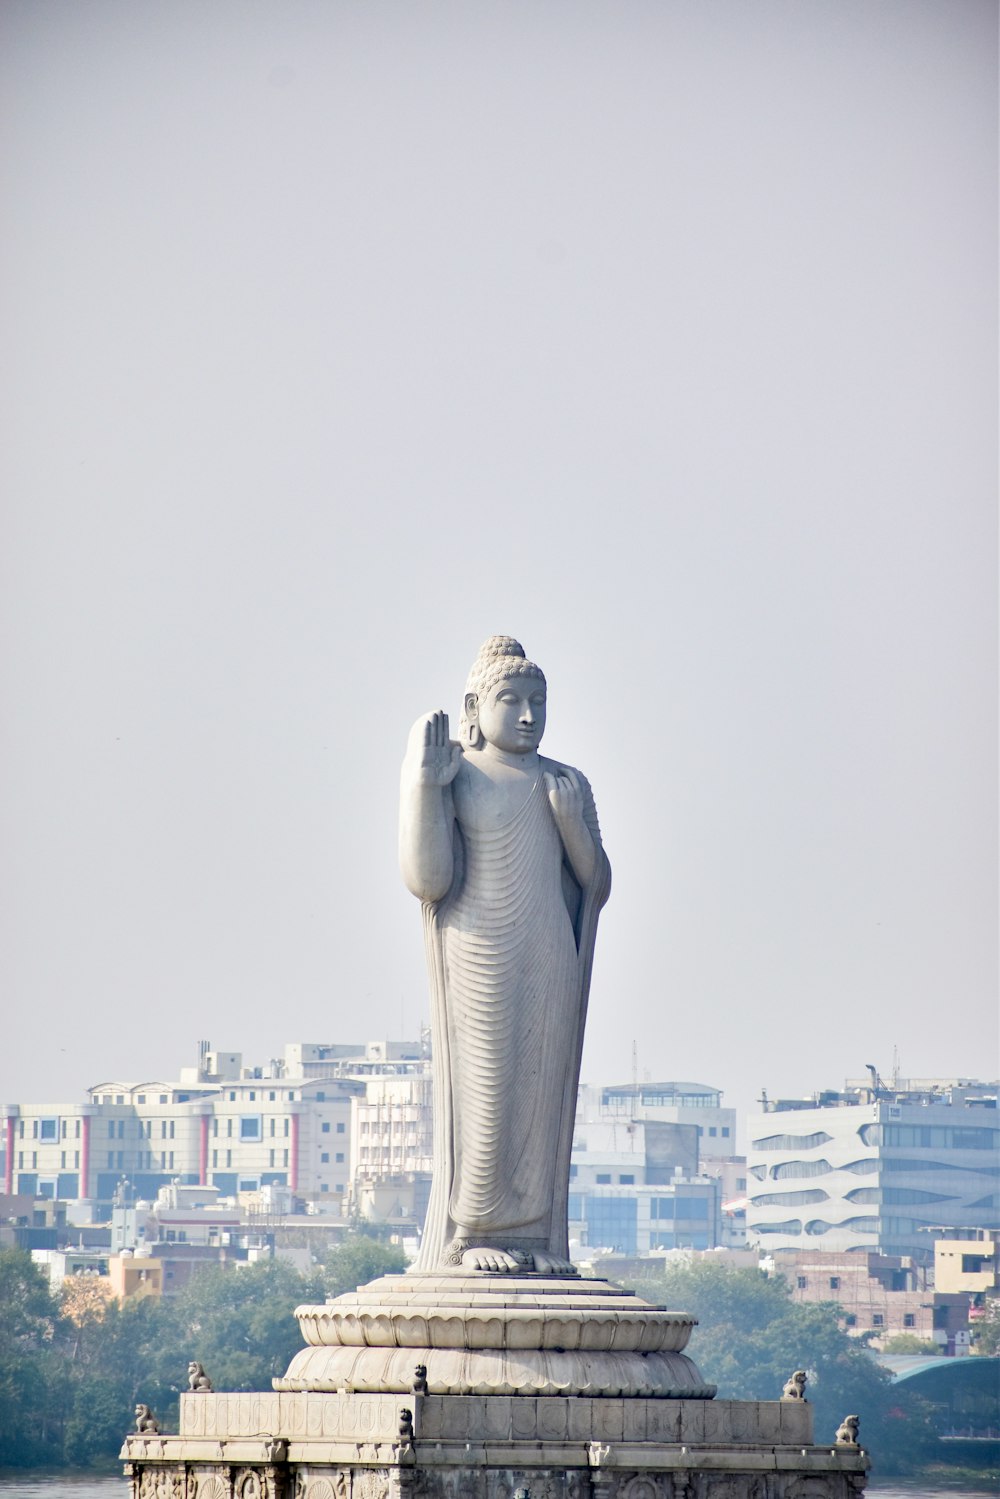 a large statue of a person standing in front of a body of water